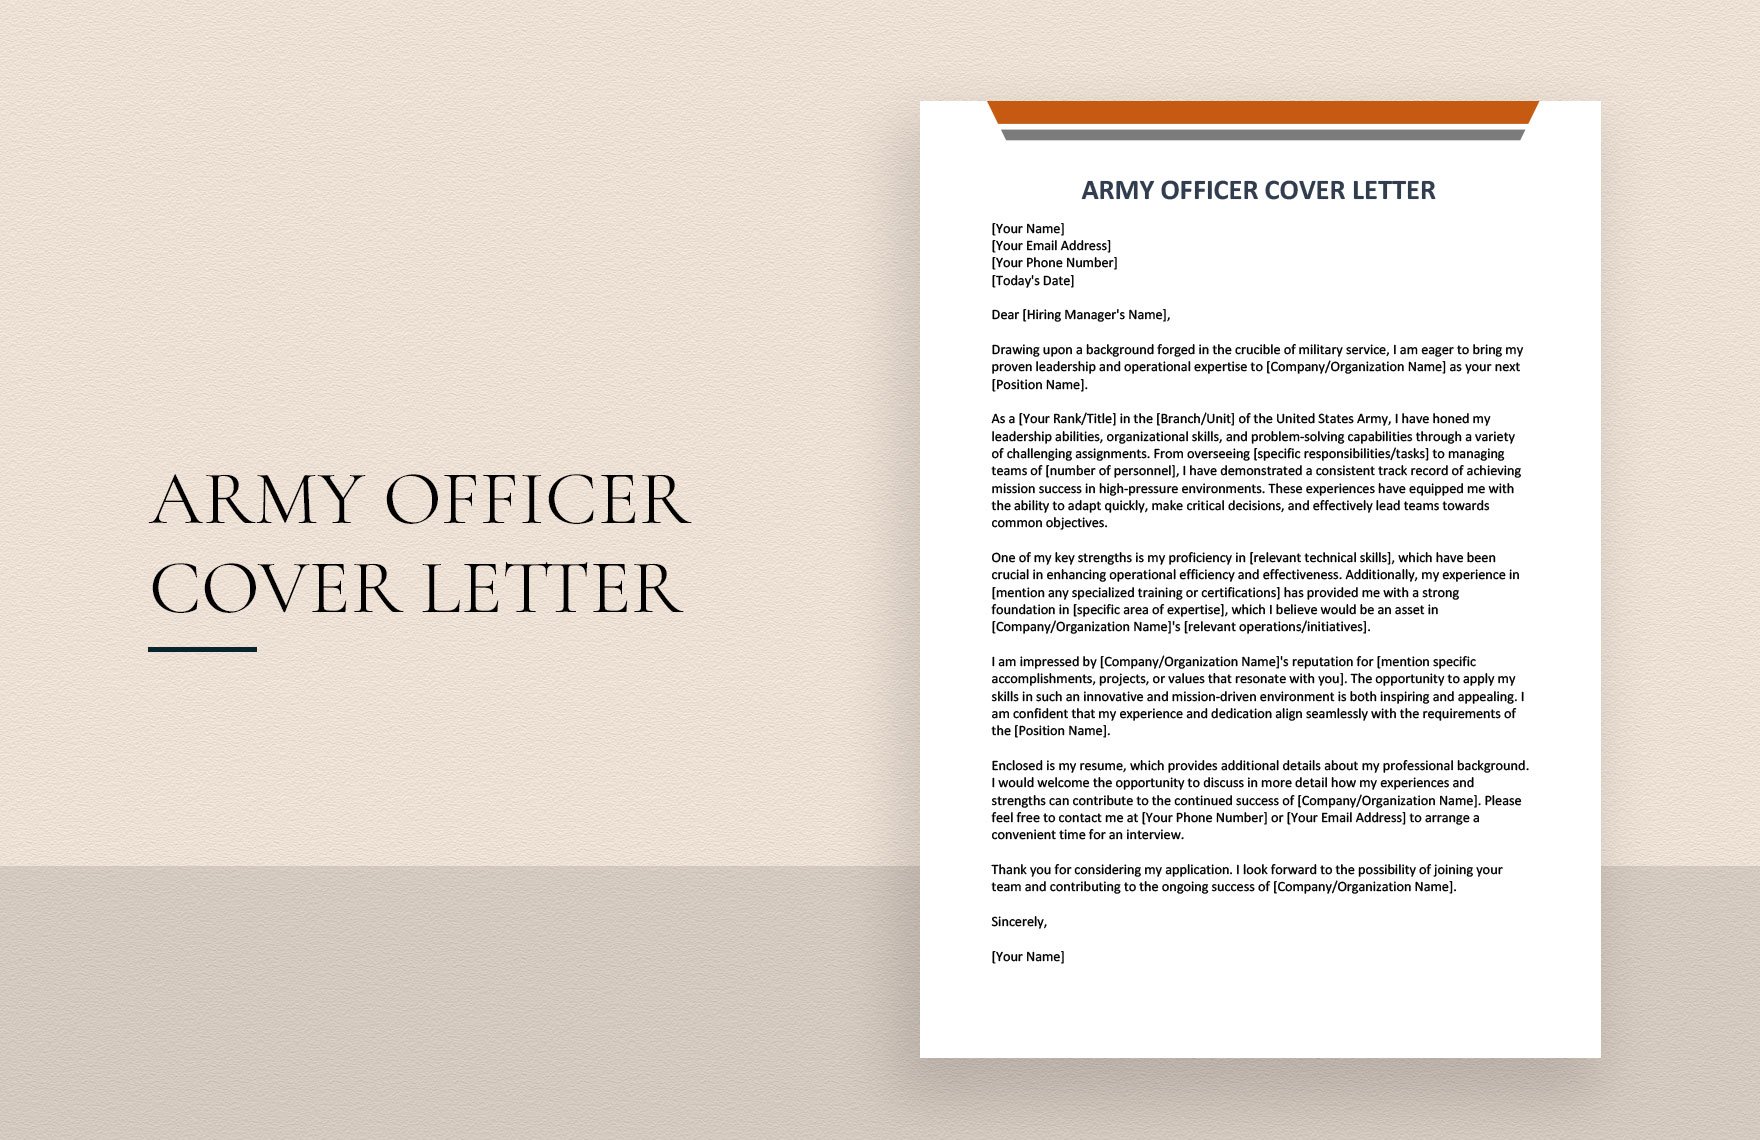 Army Officer Cover Letter